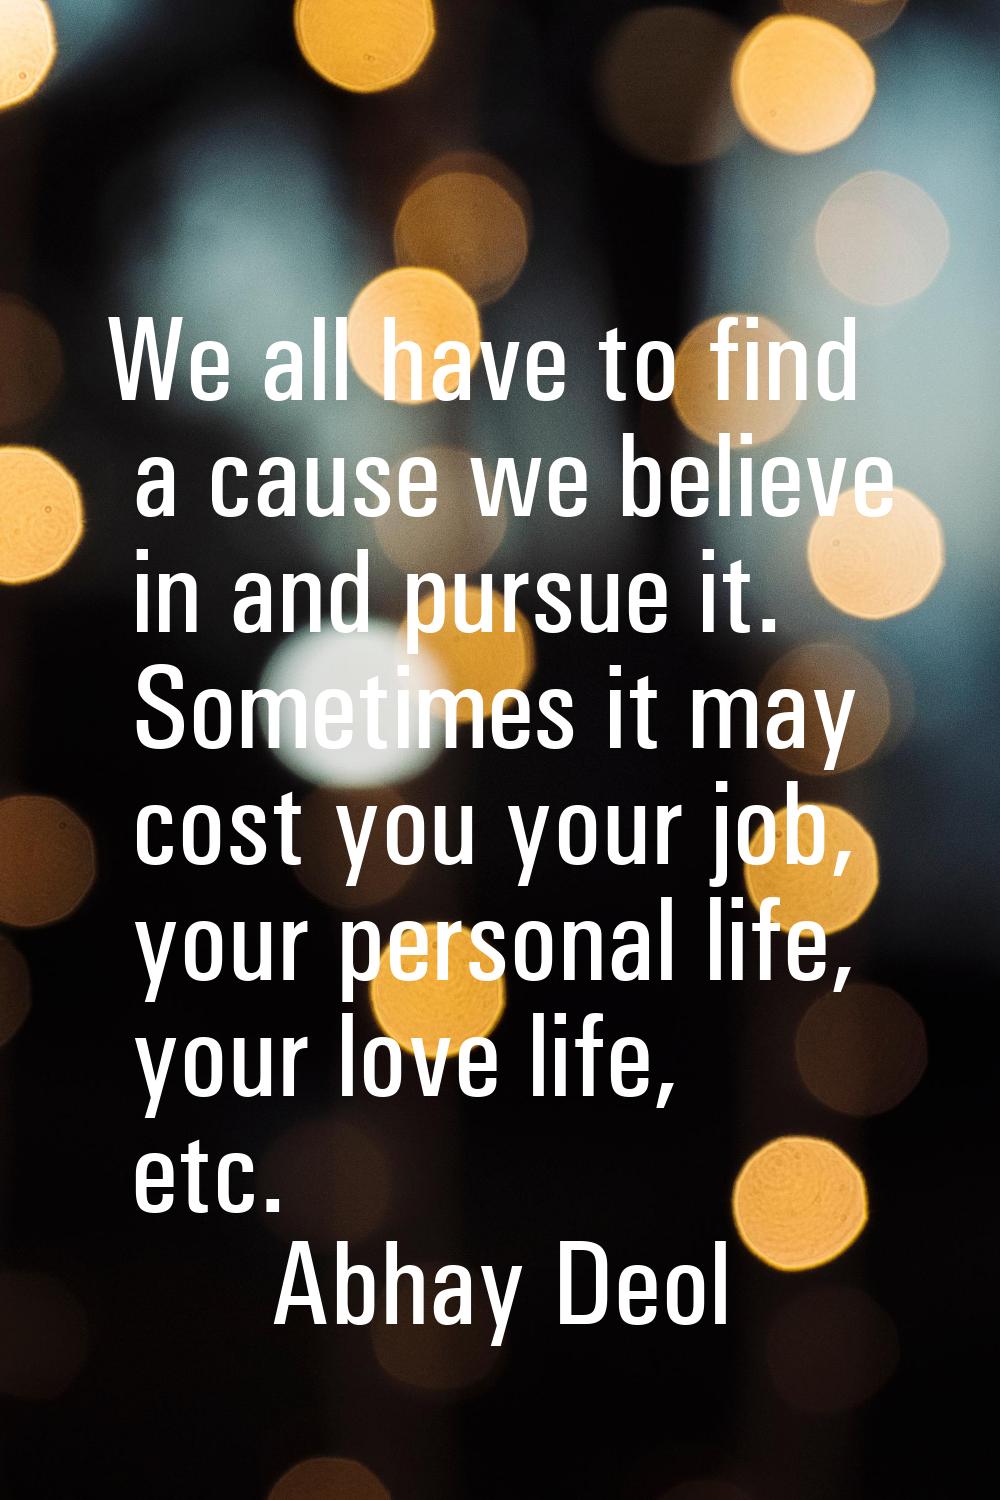 We all have to find a cause we believe in and pursue it. Sometimes it may cost you your job, your p